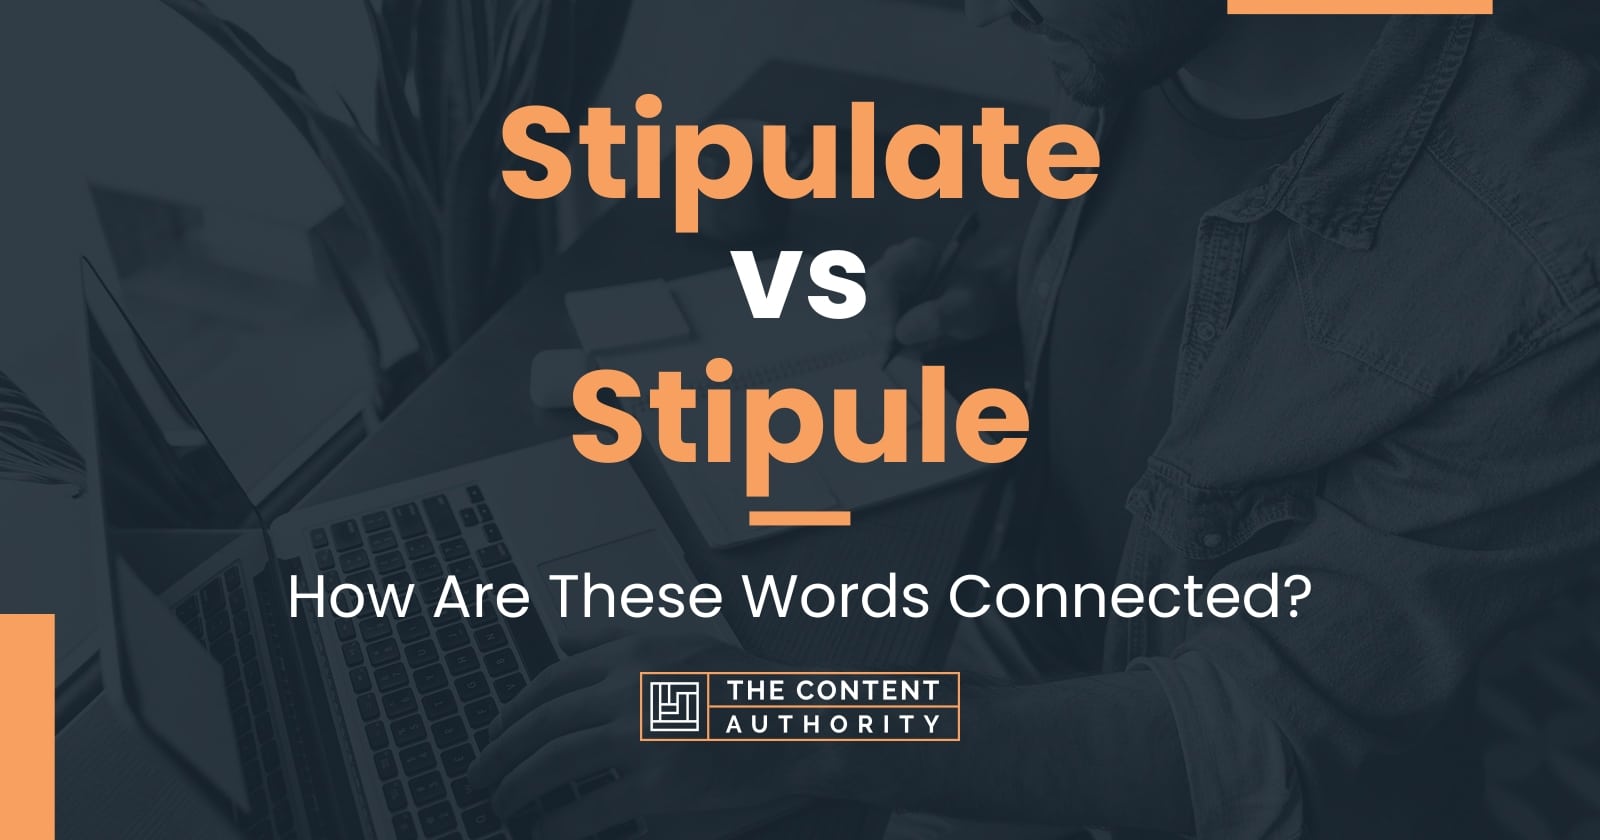 Stipulate vs Stipule: How Are These Words Connected?